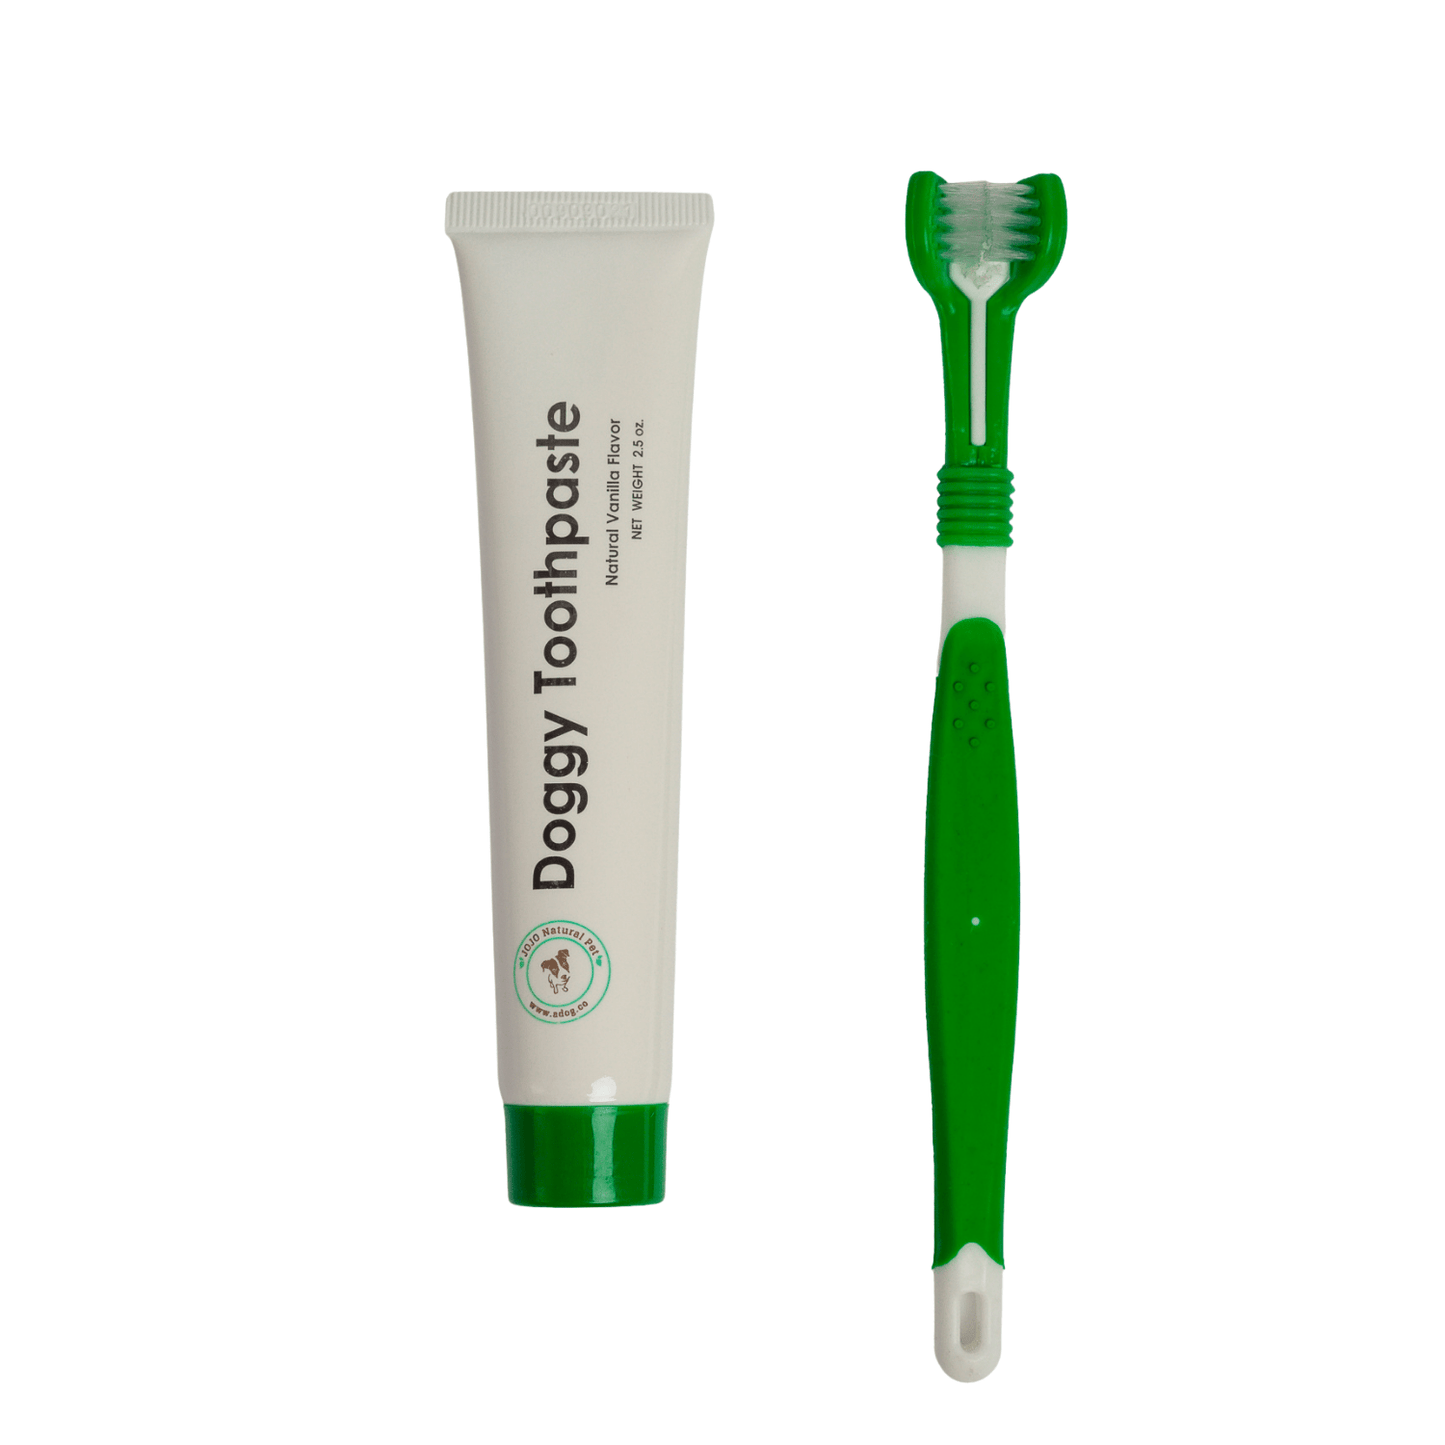 Dog and Pet Stuff Default Triple Headed Dog Tooth Brush with All-Natural Toothpaste